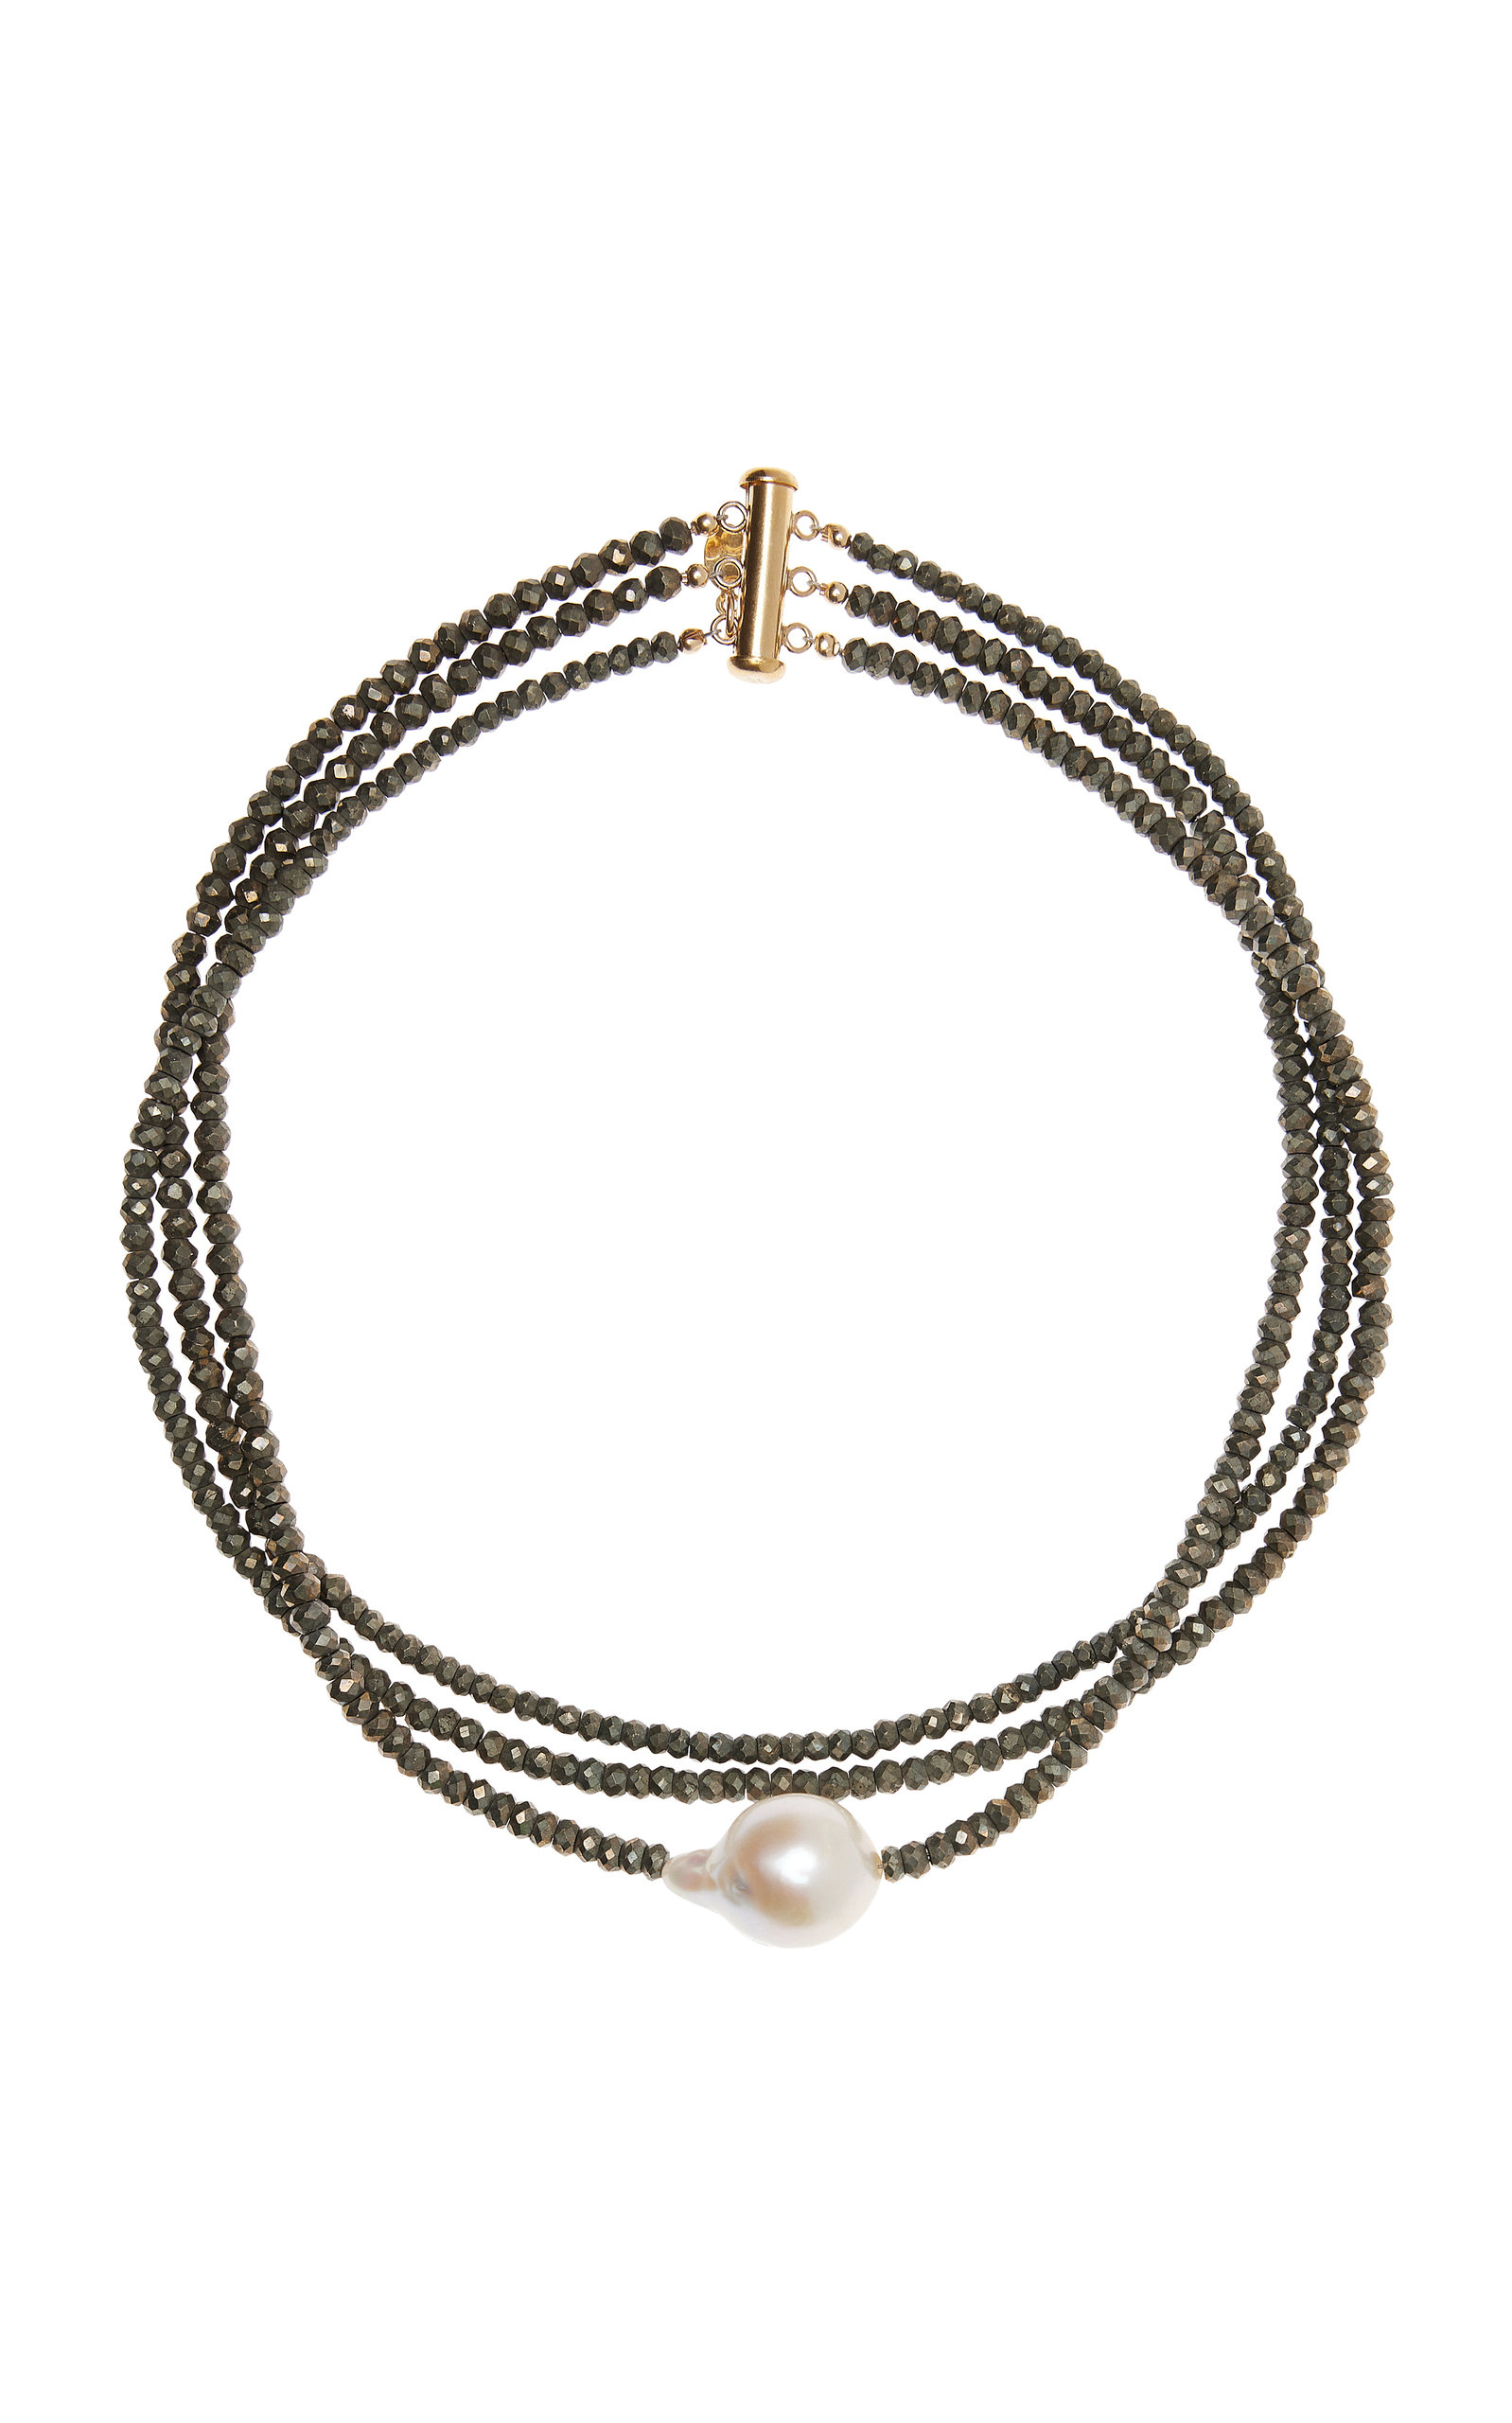 Pearl; Pyrite Gold-Filled Choker